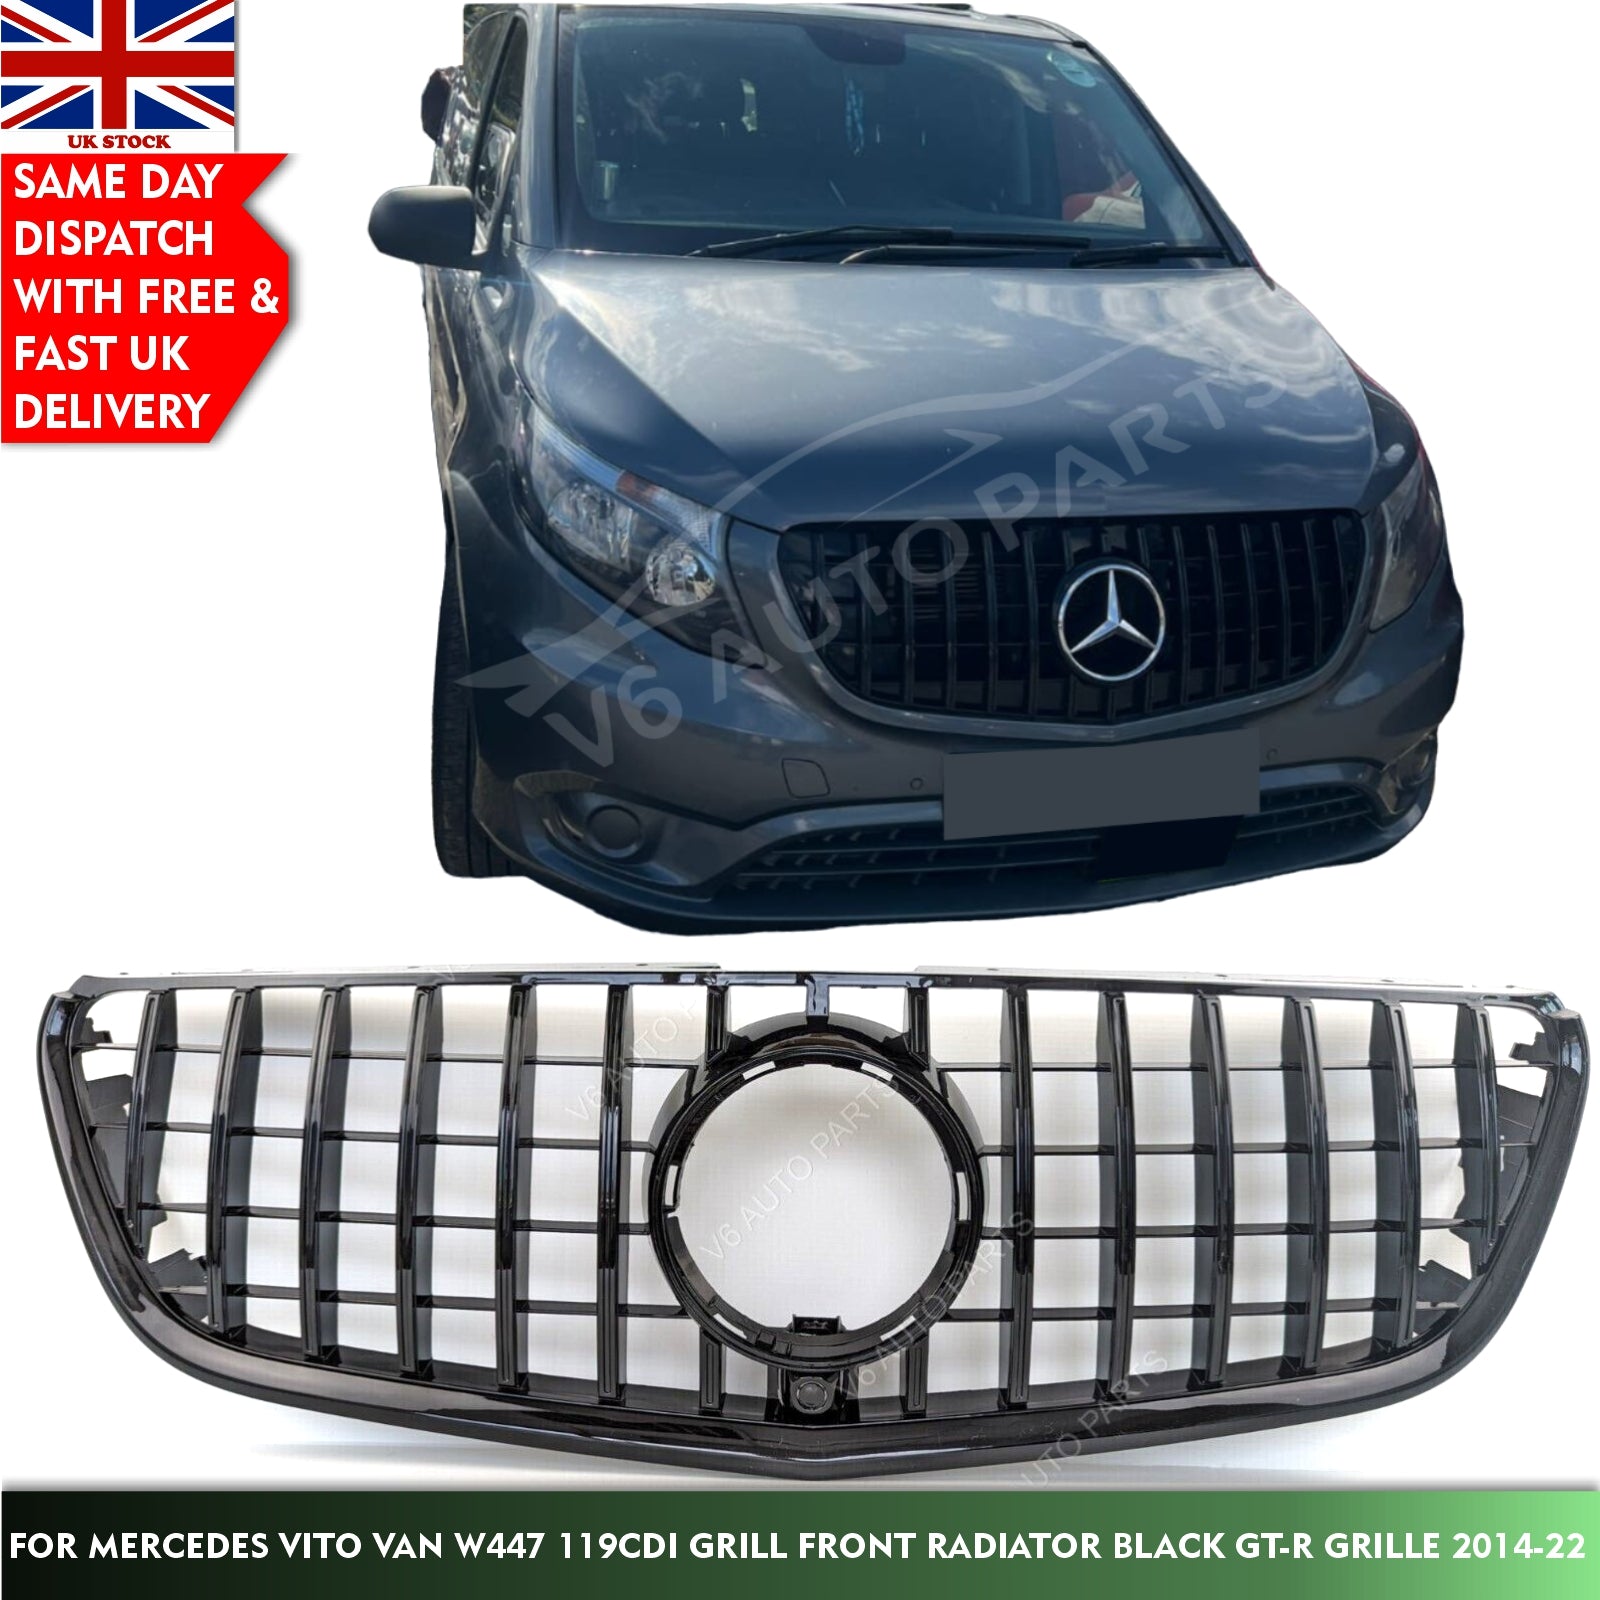 For Mercedes Vito Van W447 119CDI Grill Front Radiator Black GT-R Grille 2014-22